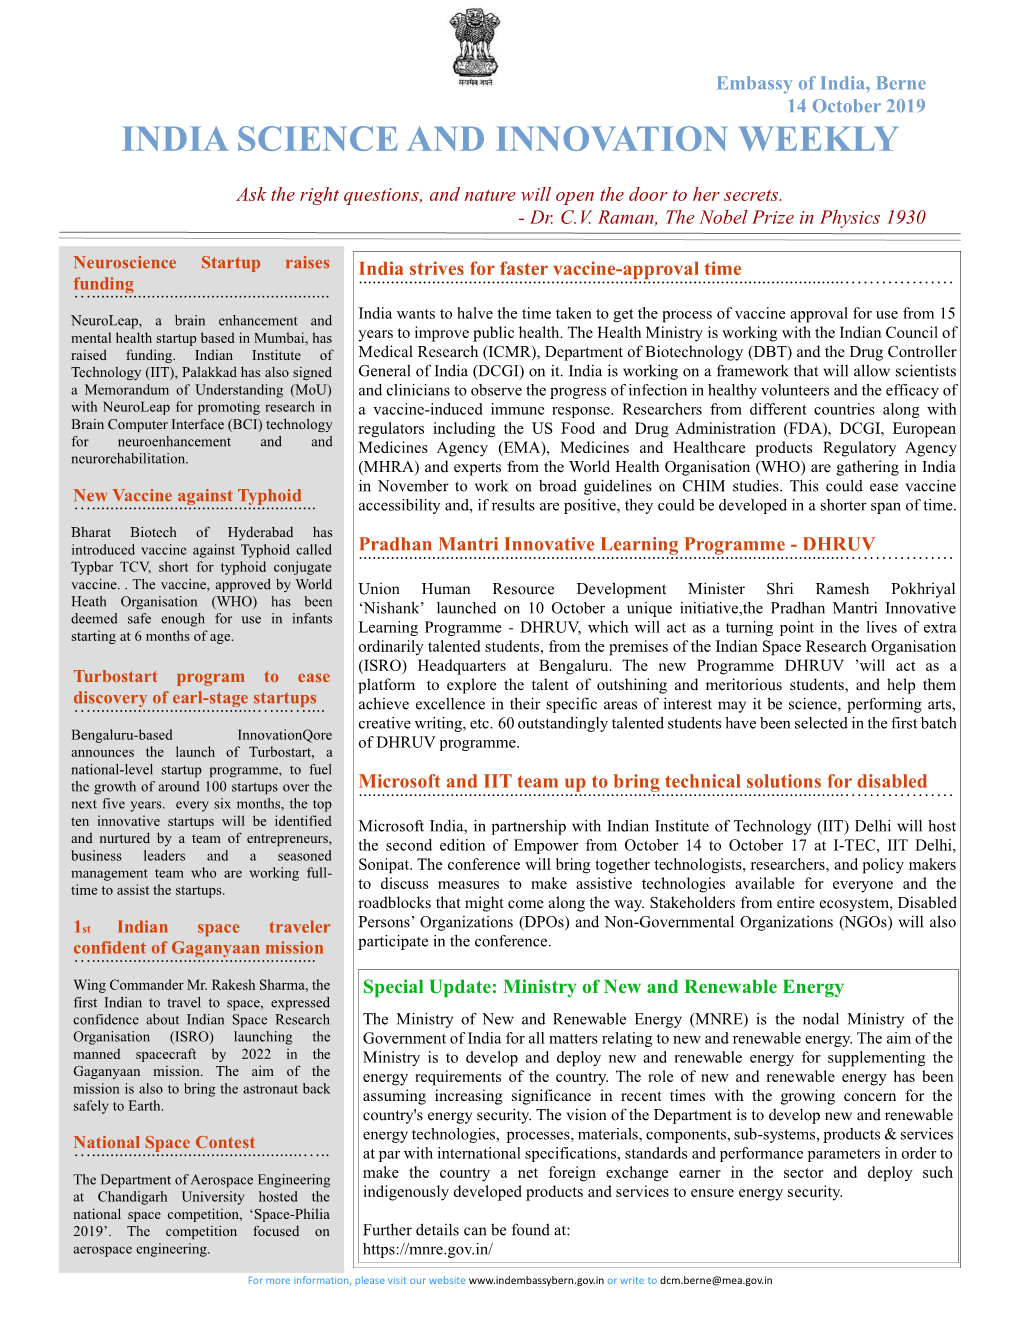 India Science and Innovation Weekly [14 October 2019]